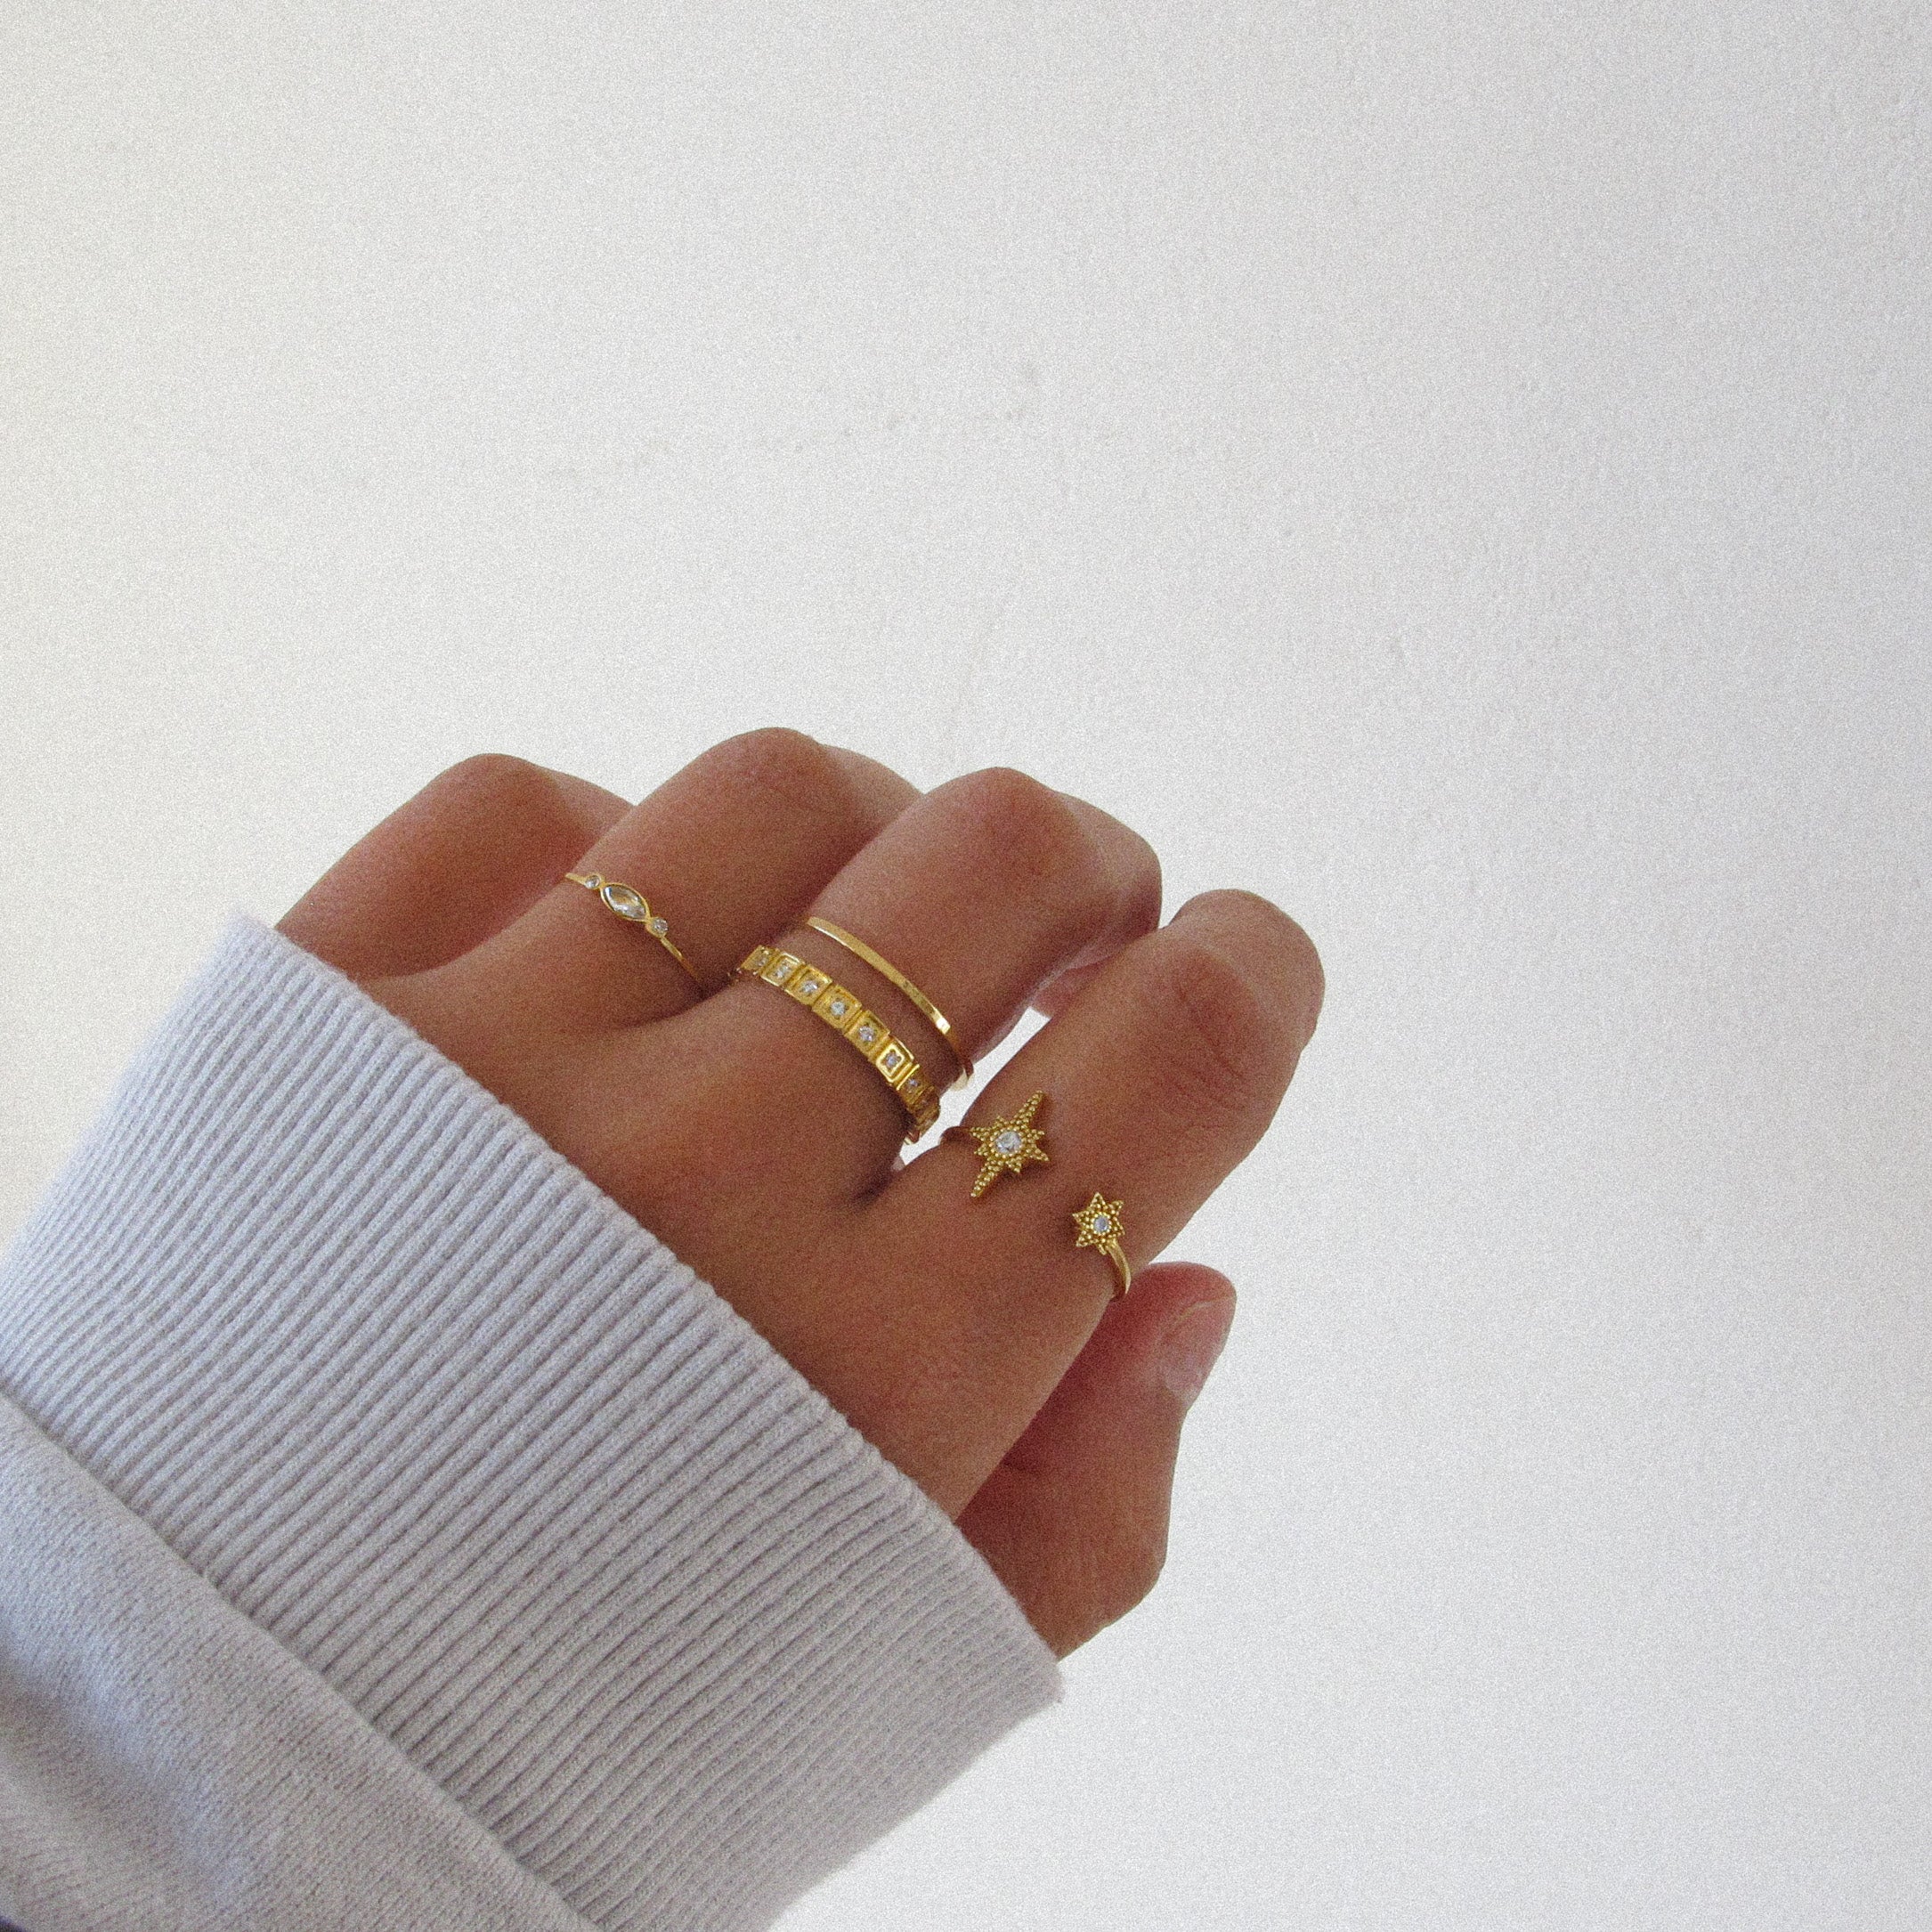 "Felicity” Delicate Ring